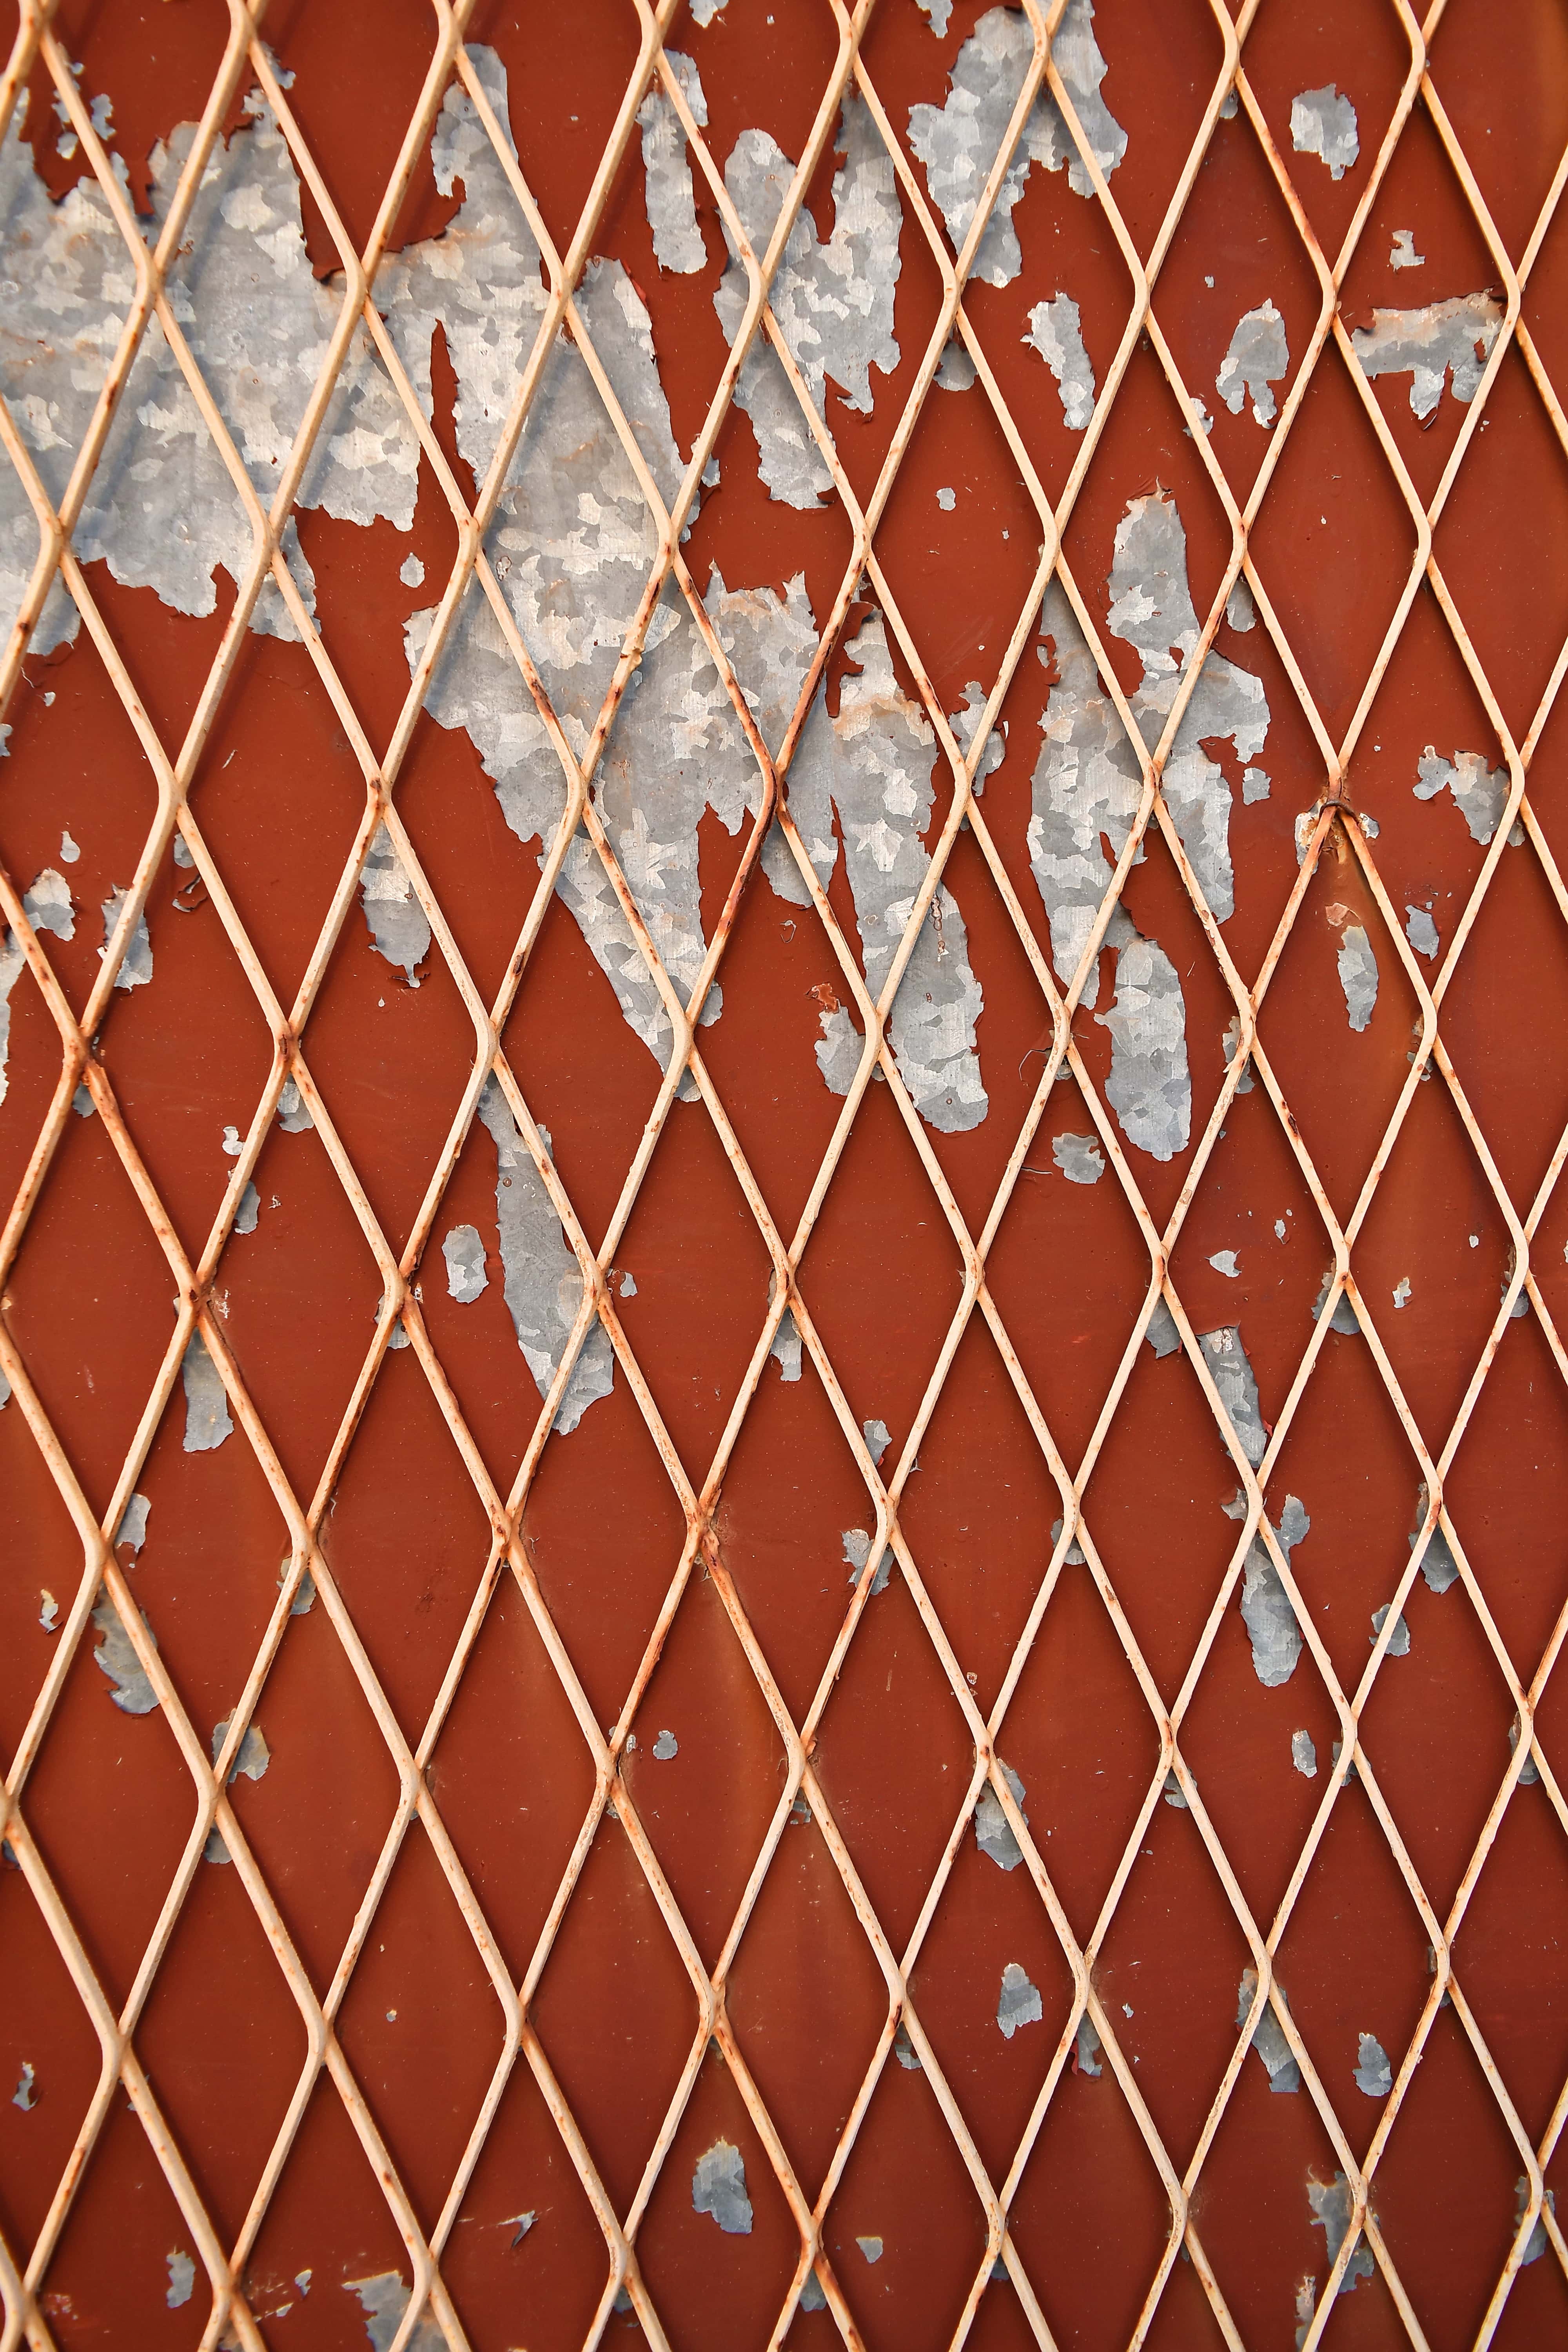 Free Picture Fence Reddish Paint Rust Decay Barrier Design Pattern Texture Steel